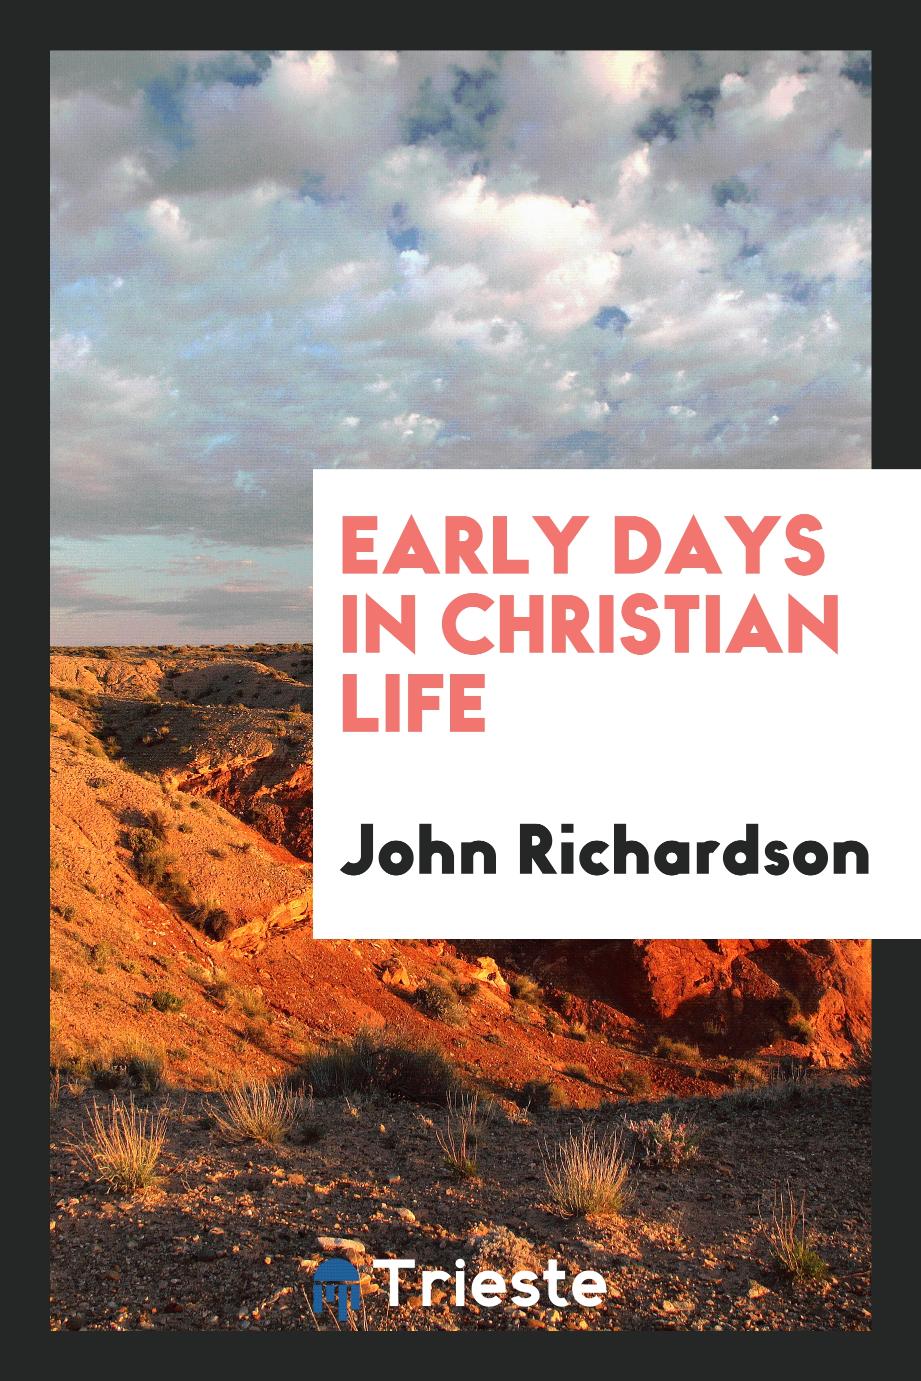 Early days in Christian life